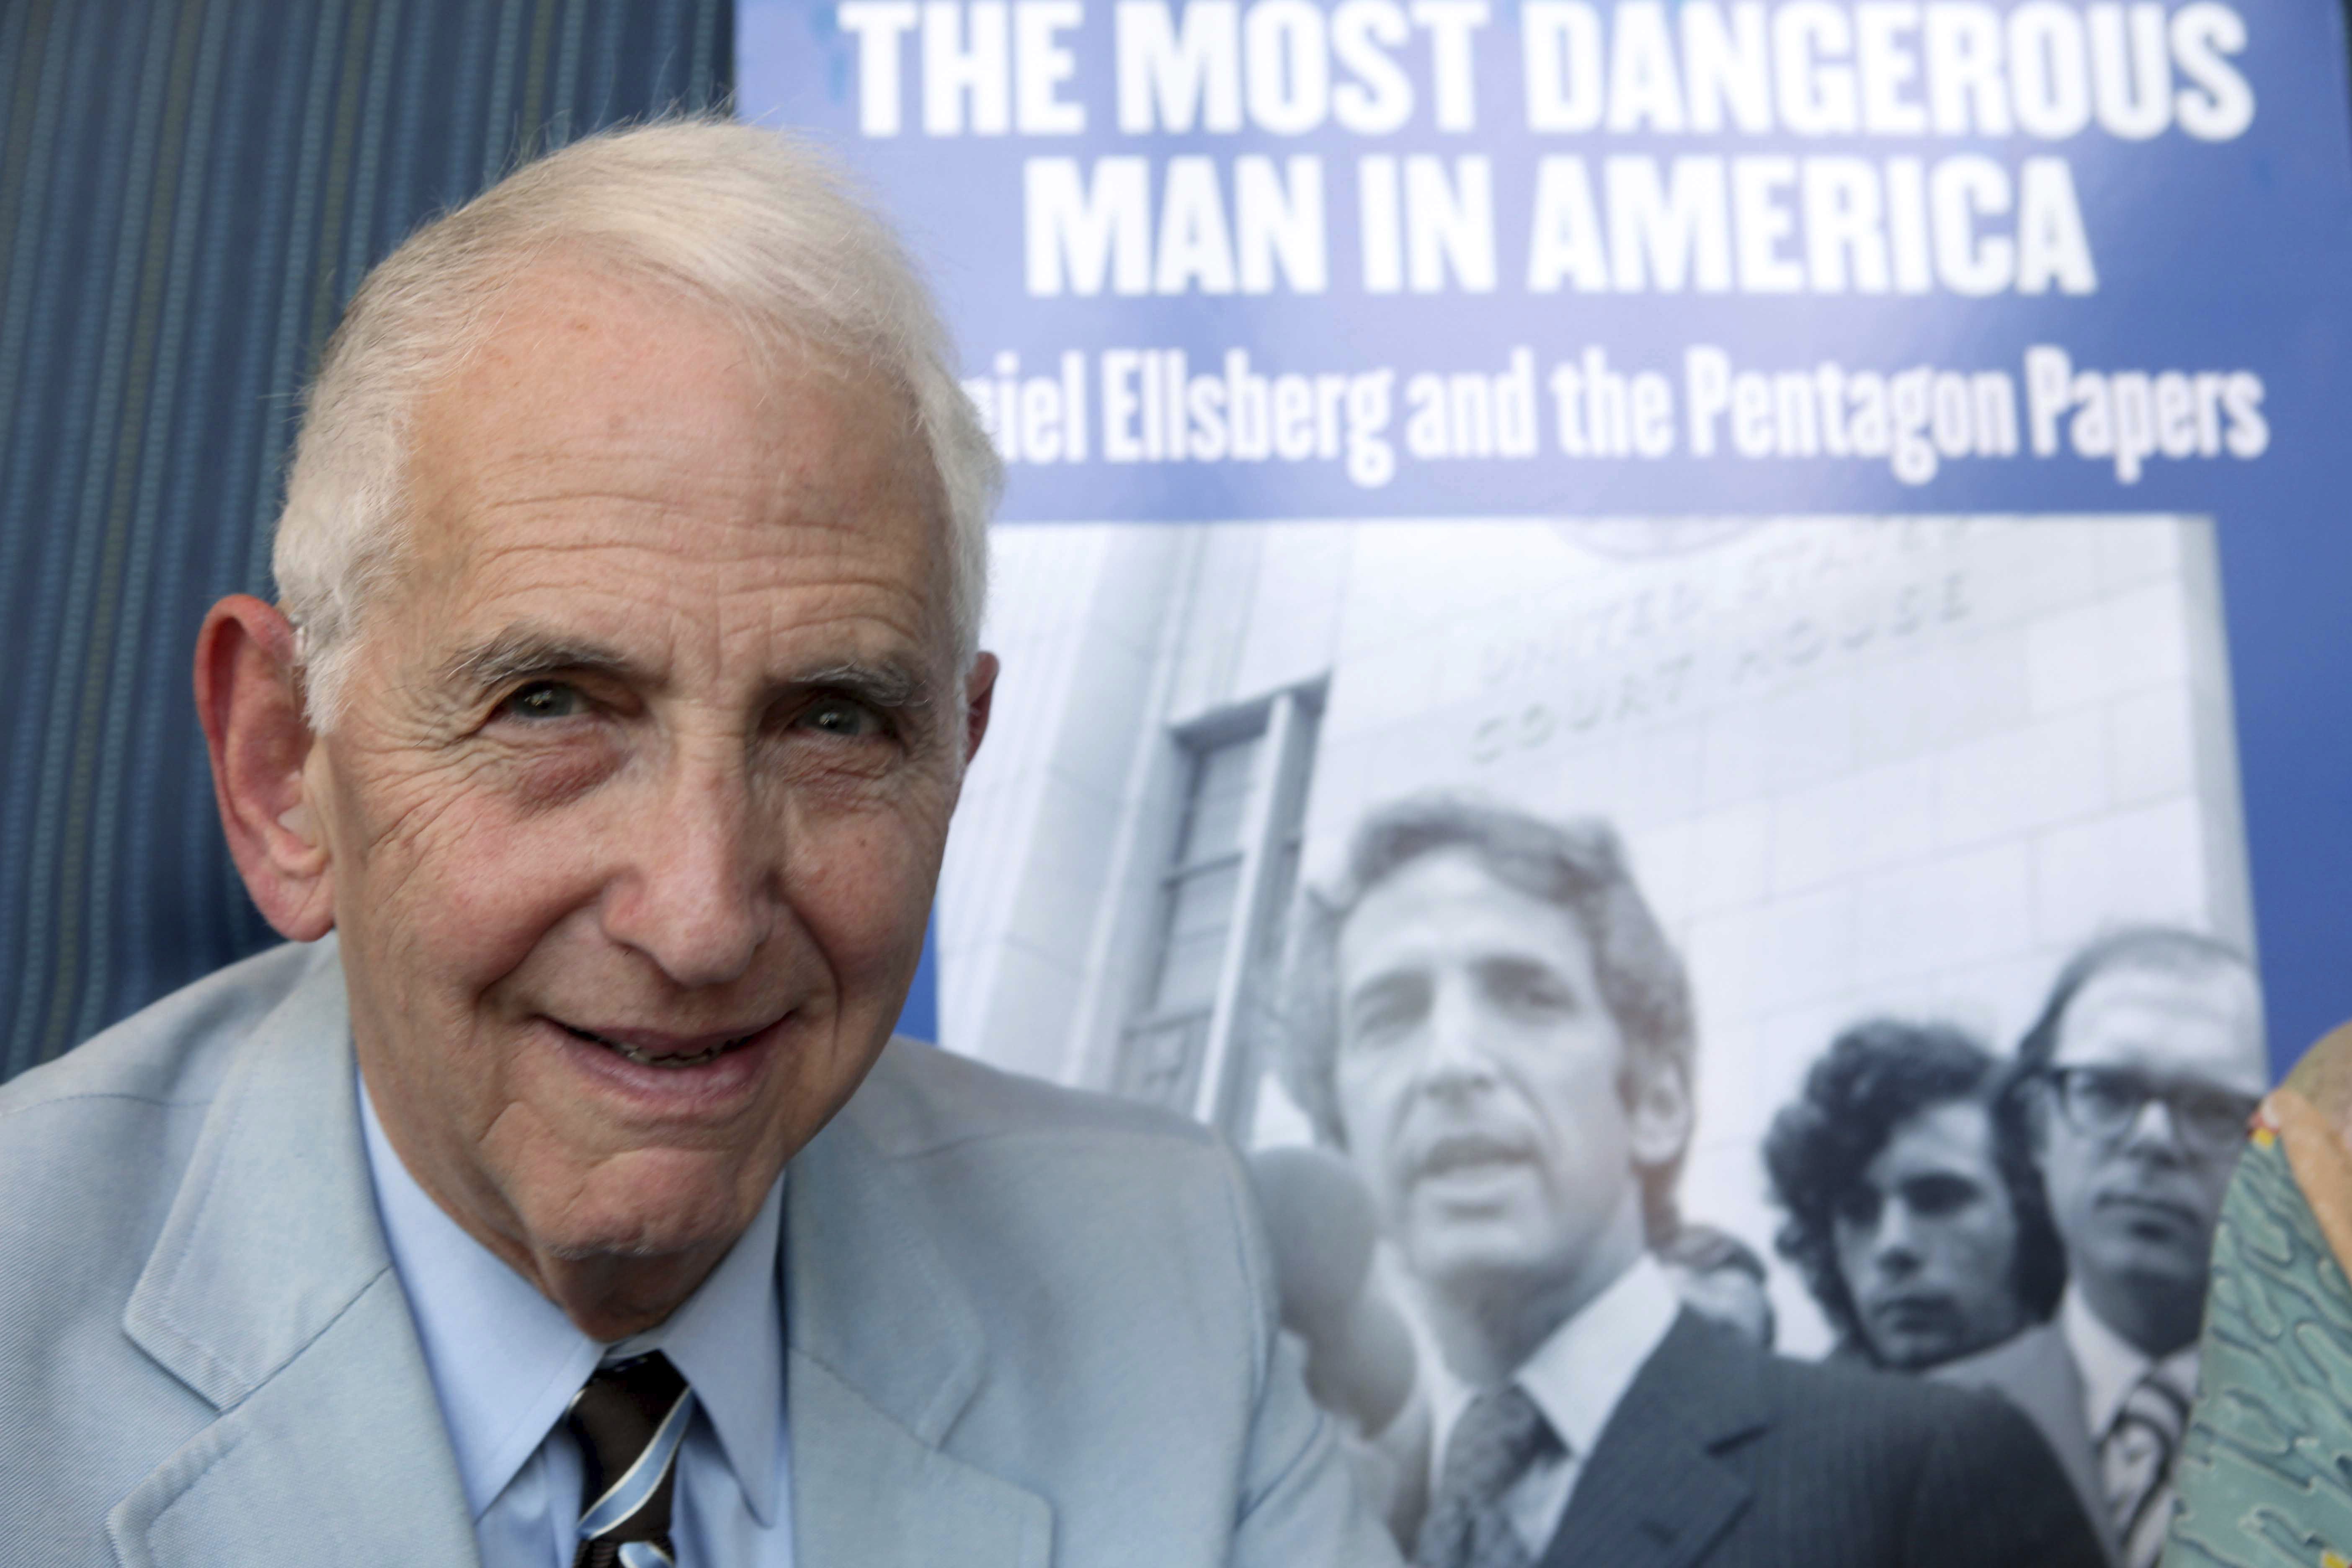 Daniel Ellsberg, the government analyst and whistleblower who leaked the Pentagon Papers in 1971, speaks during an interview in Los Angeles on Sept. 23, 2009. Ellsberg died June 16 at age 92. (AP/Nick Ut, File)